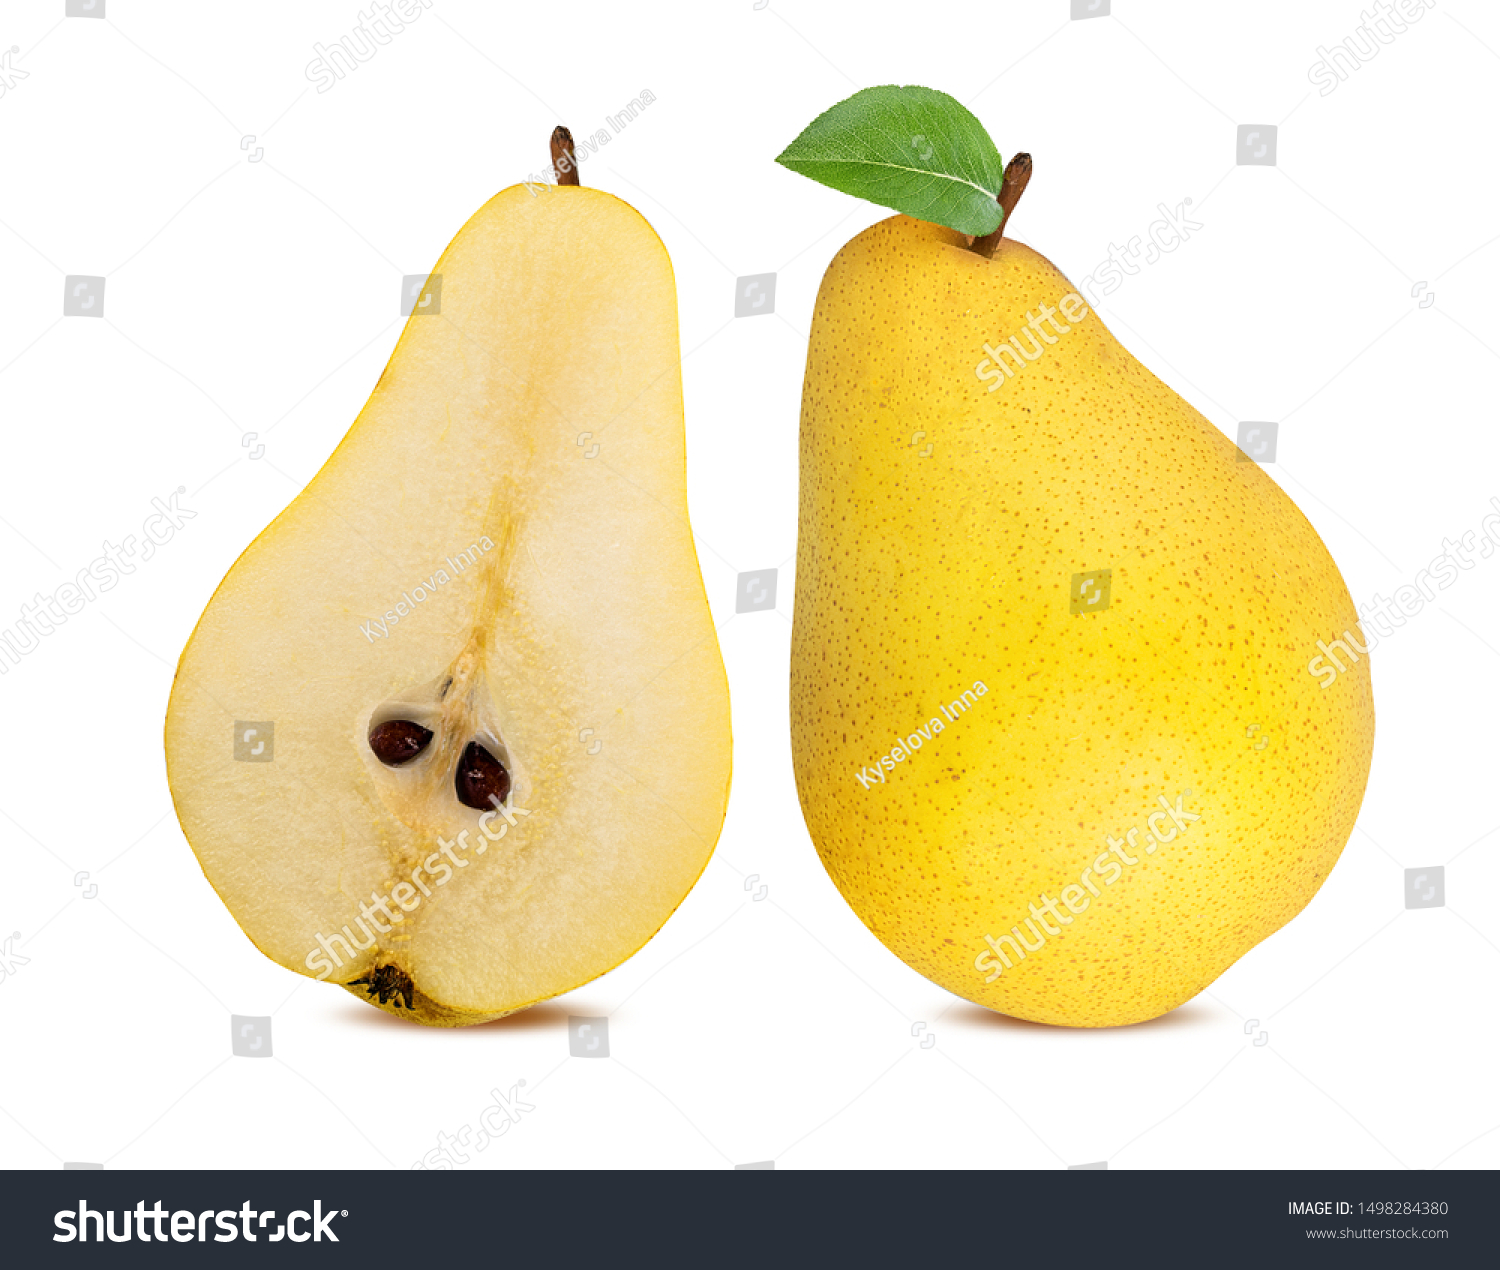 pears isolated on white background #1498284380